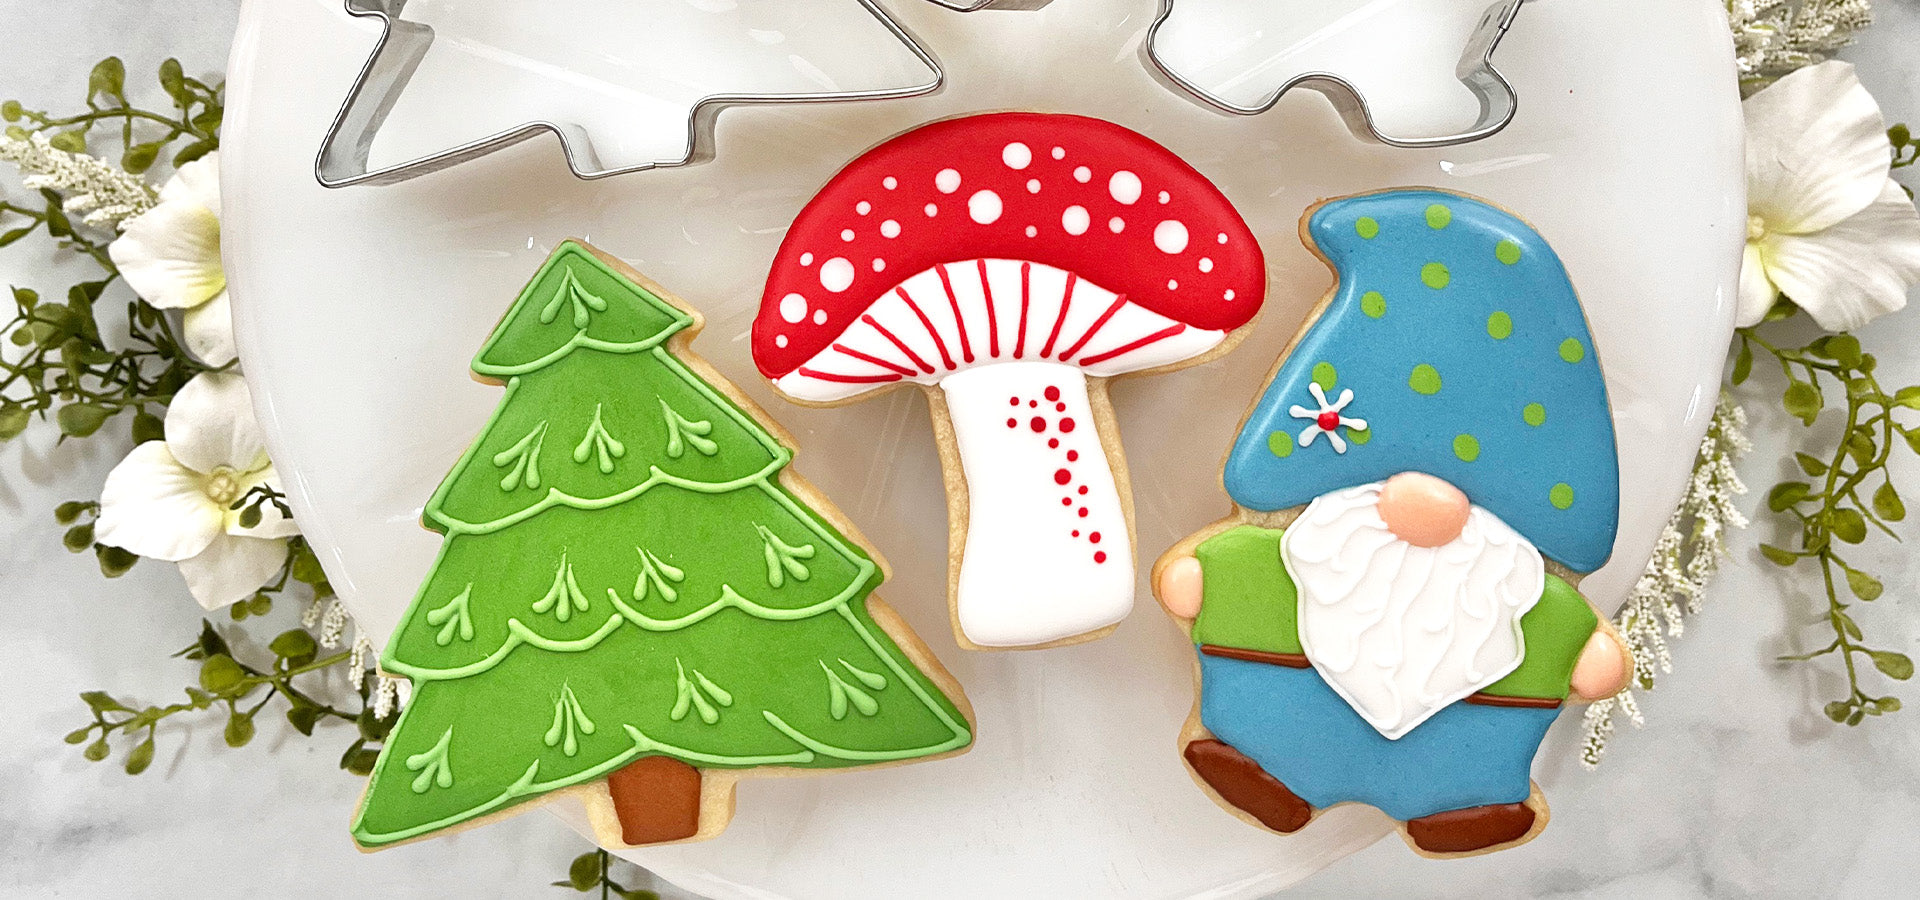 Tree, mushroom, and gnome cookie on a white plate